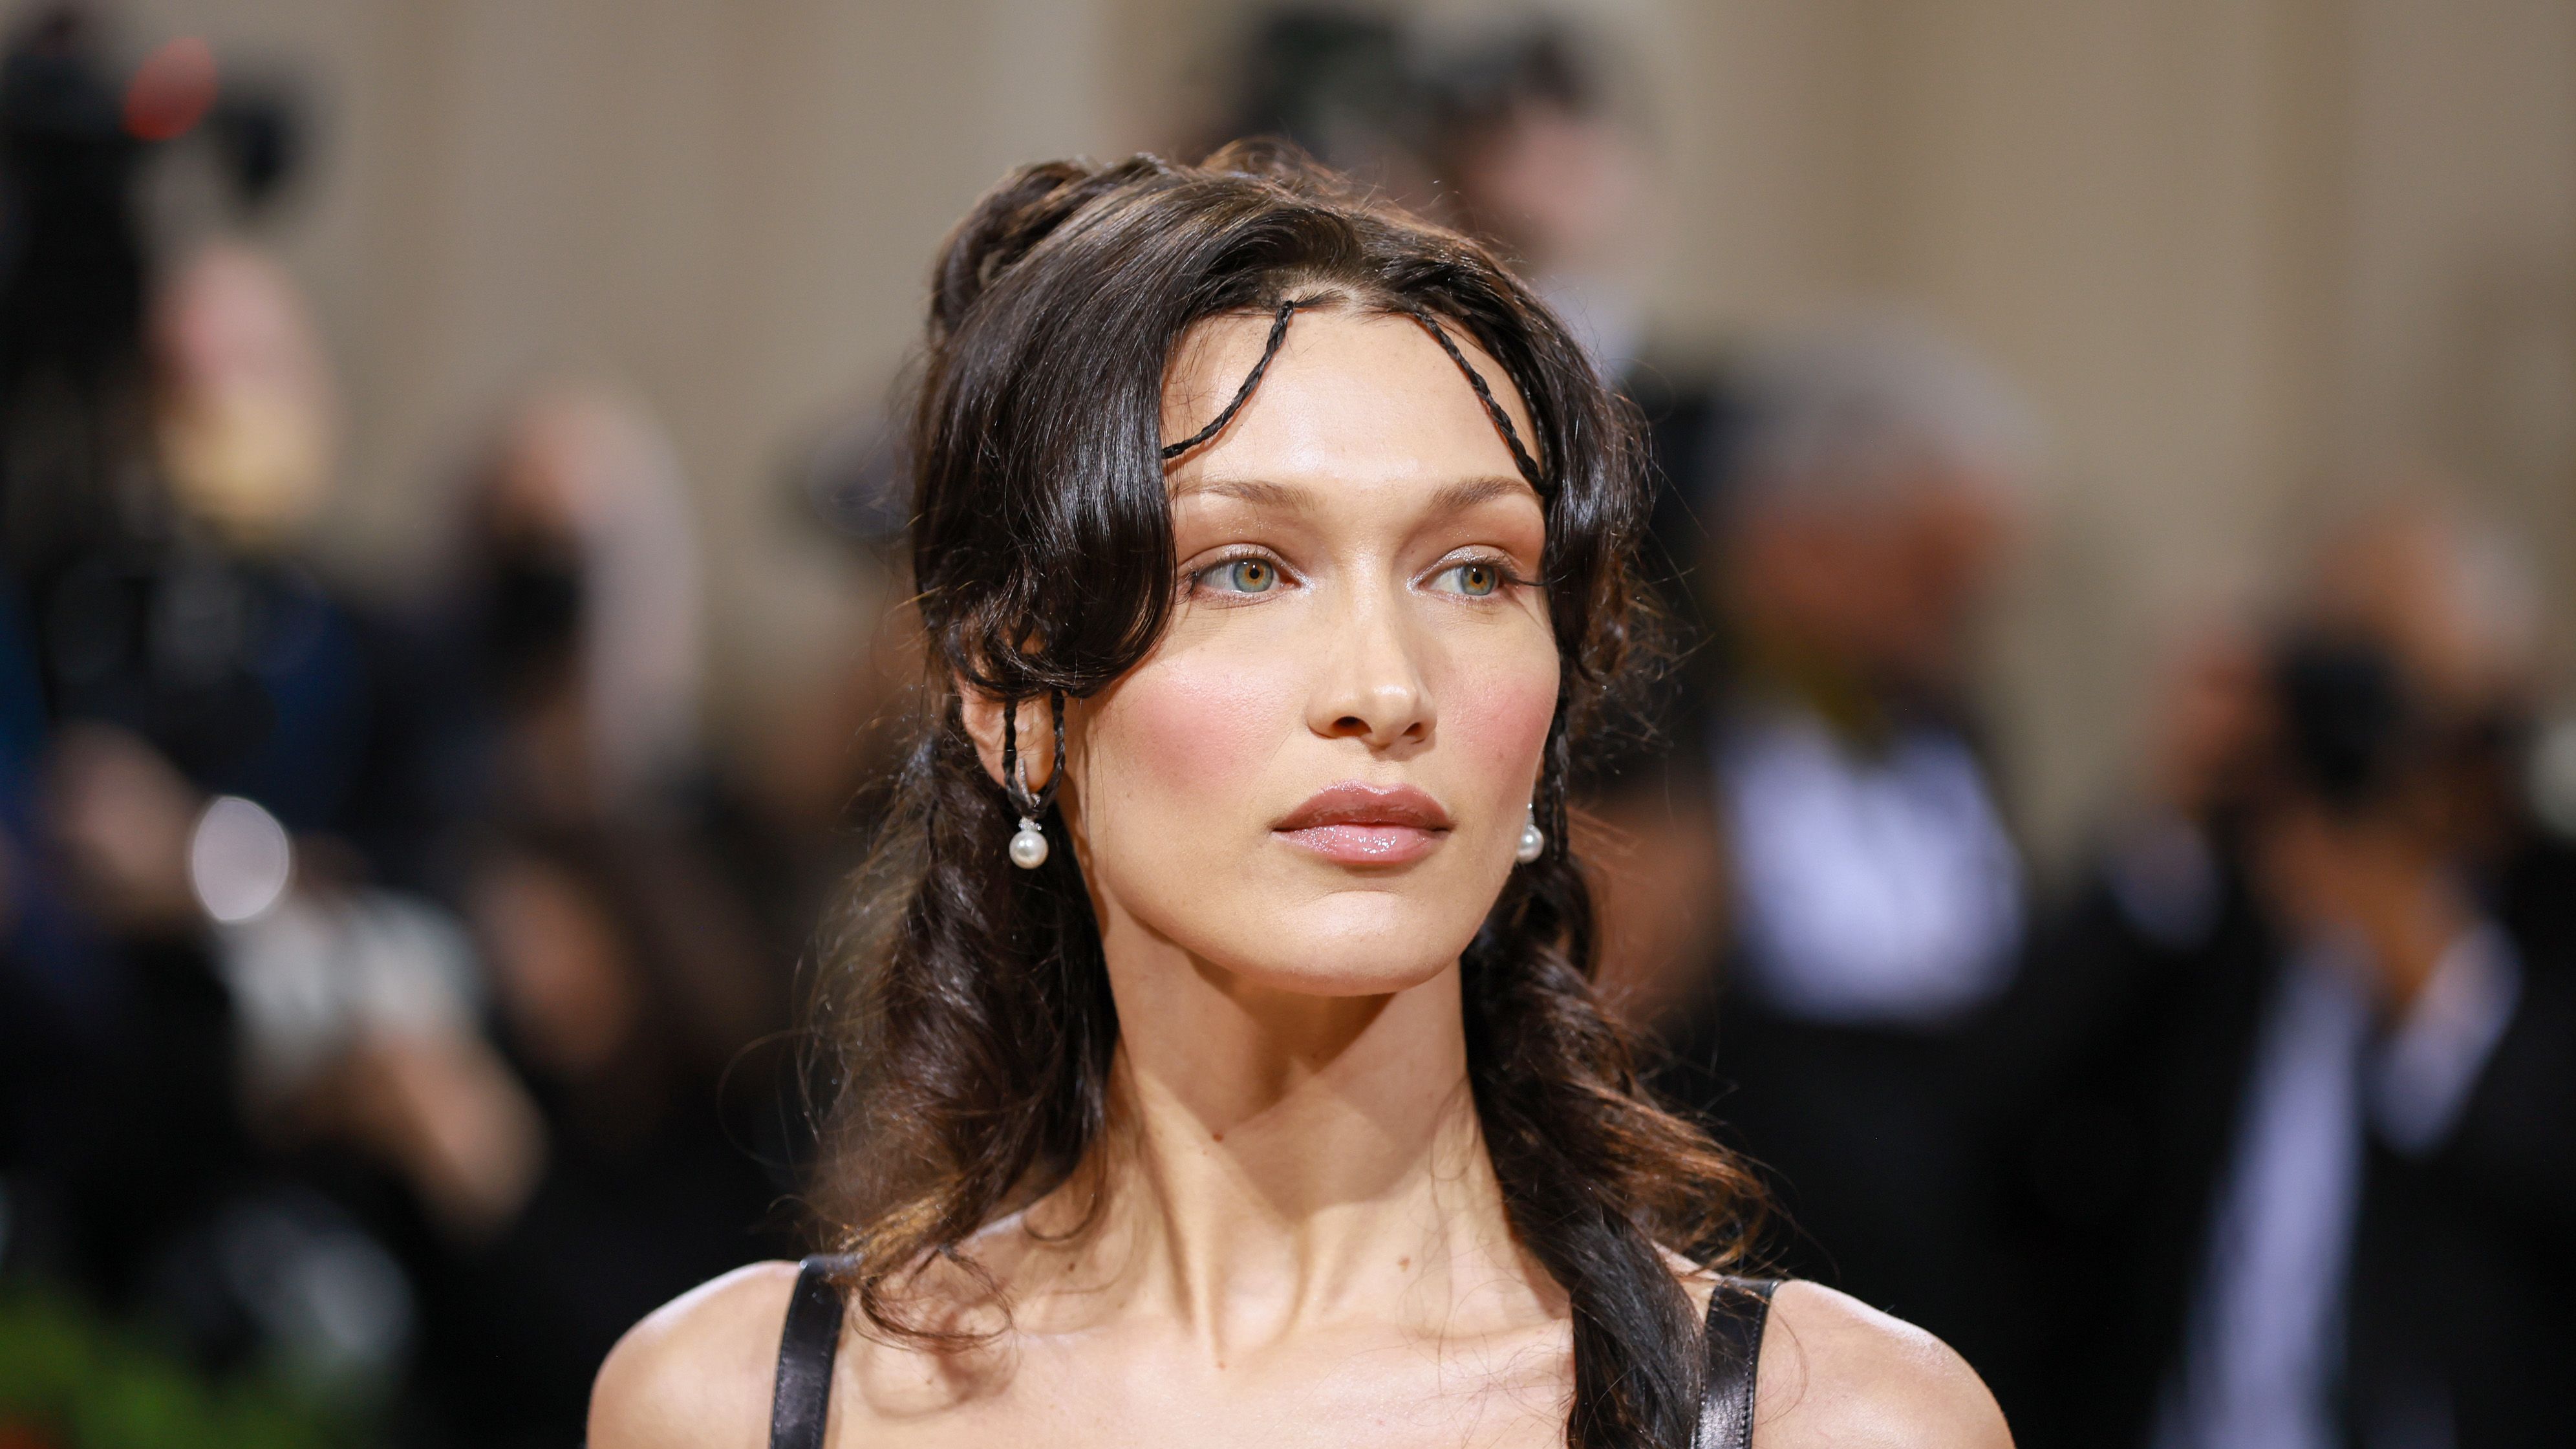 https://hips.hearstapps.com/hmg-prod/images/bella-hadid-attends-the-2022-met-gala-celebrating-in-news-photo-1651541897.jpg?crop=1xw:0.84375xh;center,top